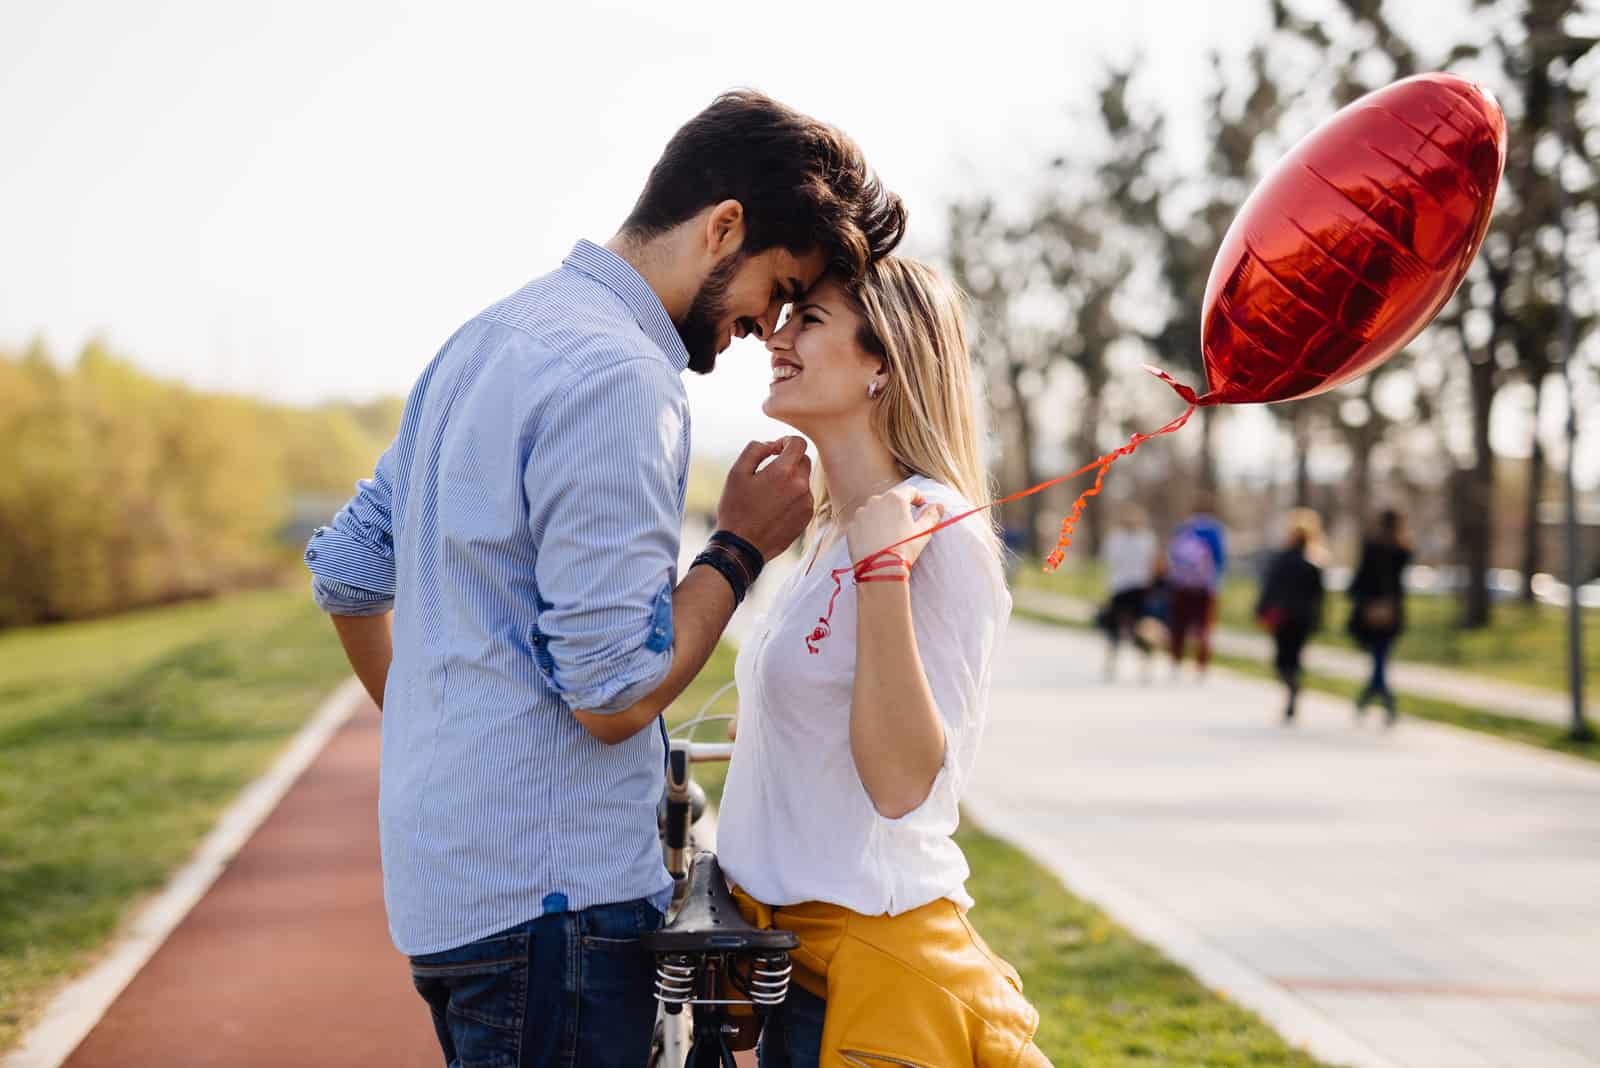 How To Make An Aries Man Obsessed With You: 15 Golden Tips